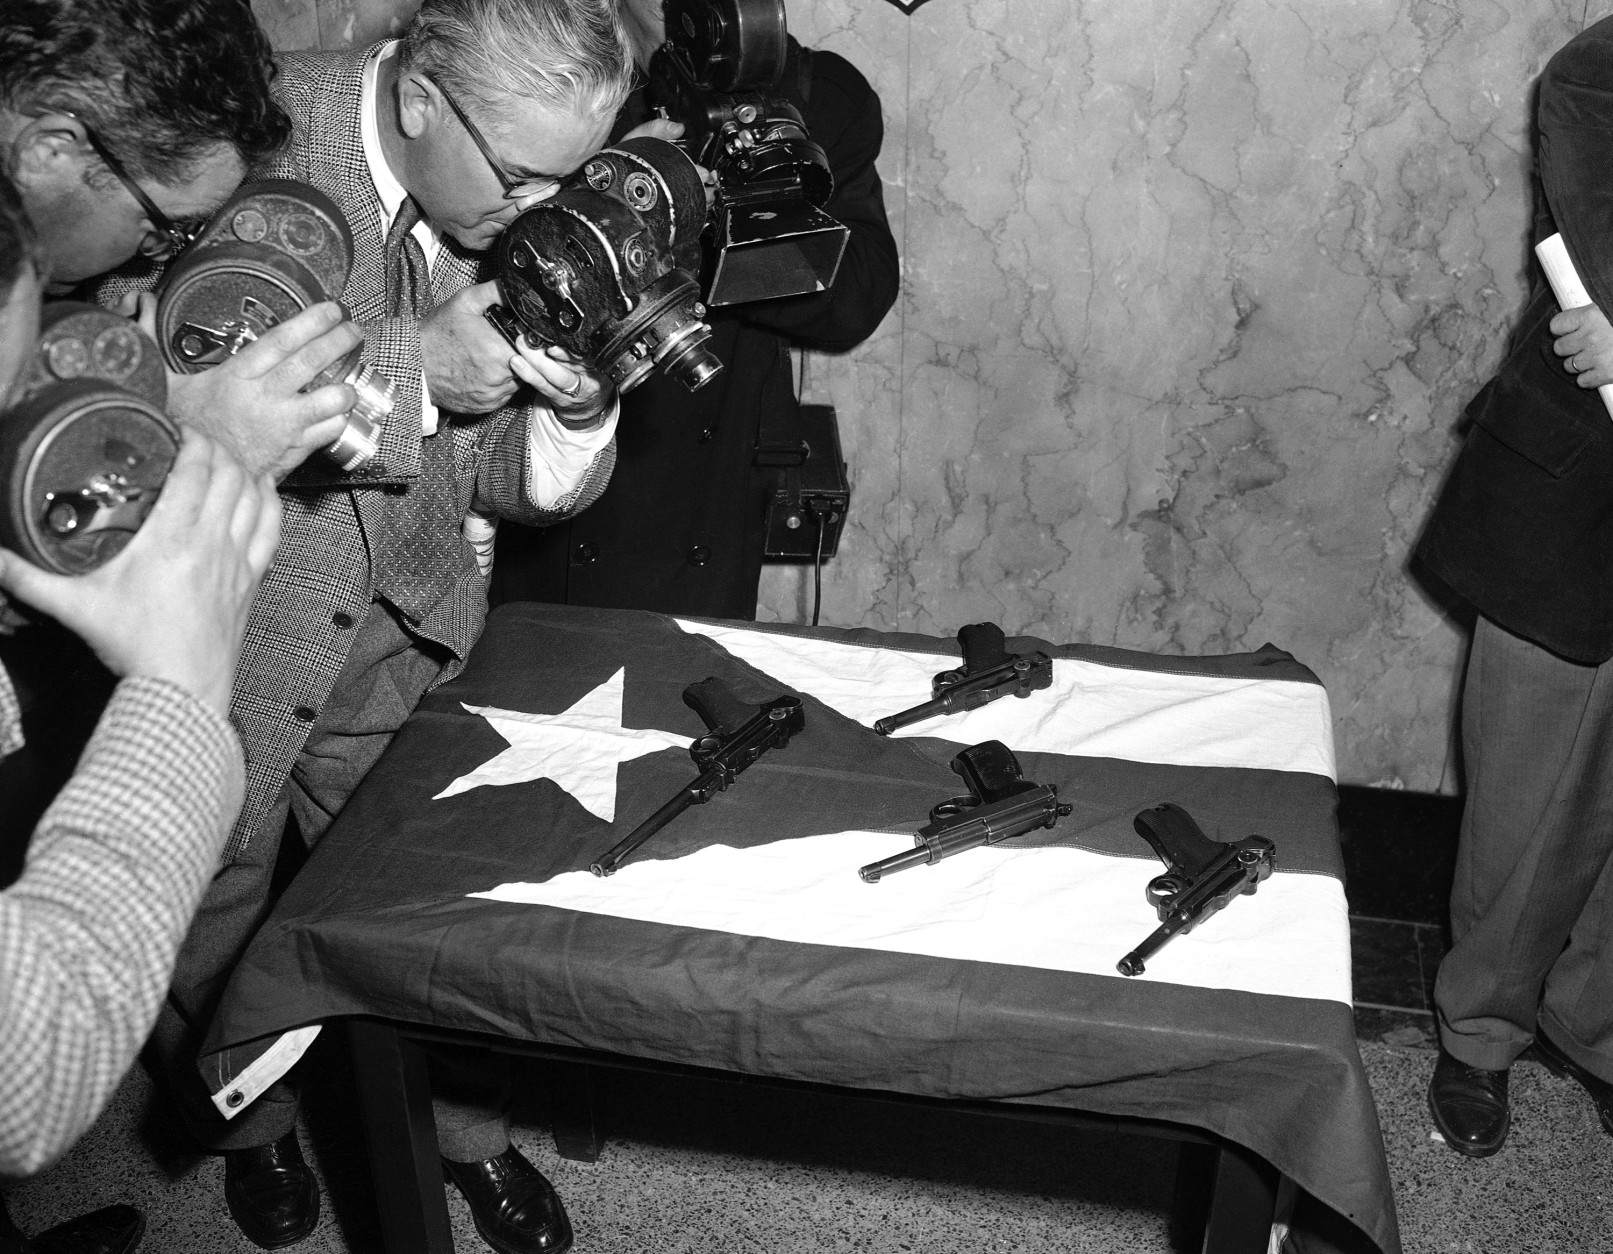 Photographers close in on some souvenirs of a busy day in Congress, spread out at police headquarters on a flag of Puerto Rico, on March 1, 1954. It was a time of routine business, transacted peacefully, in the House chamber when cries of ?Free Puerto Rico? broke the calm, this flag was waved from the spectators gallery and pistol volleys felled five Congressmen. In center foreground is a 38 cal. Automatic. The others are German Lugers. (AP Photo)